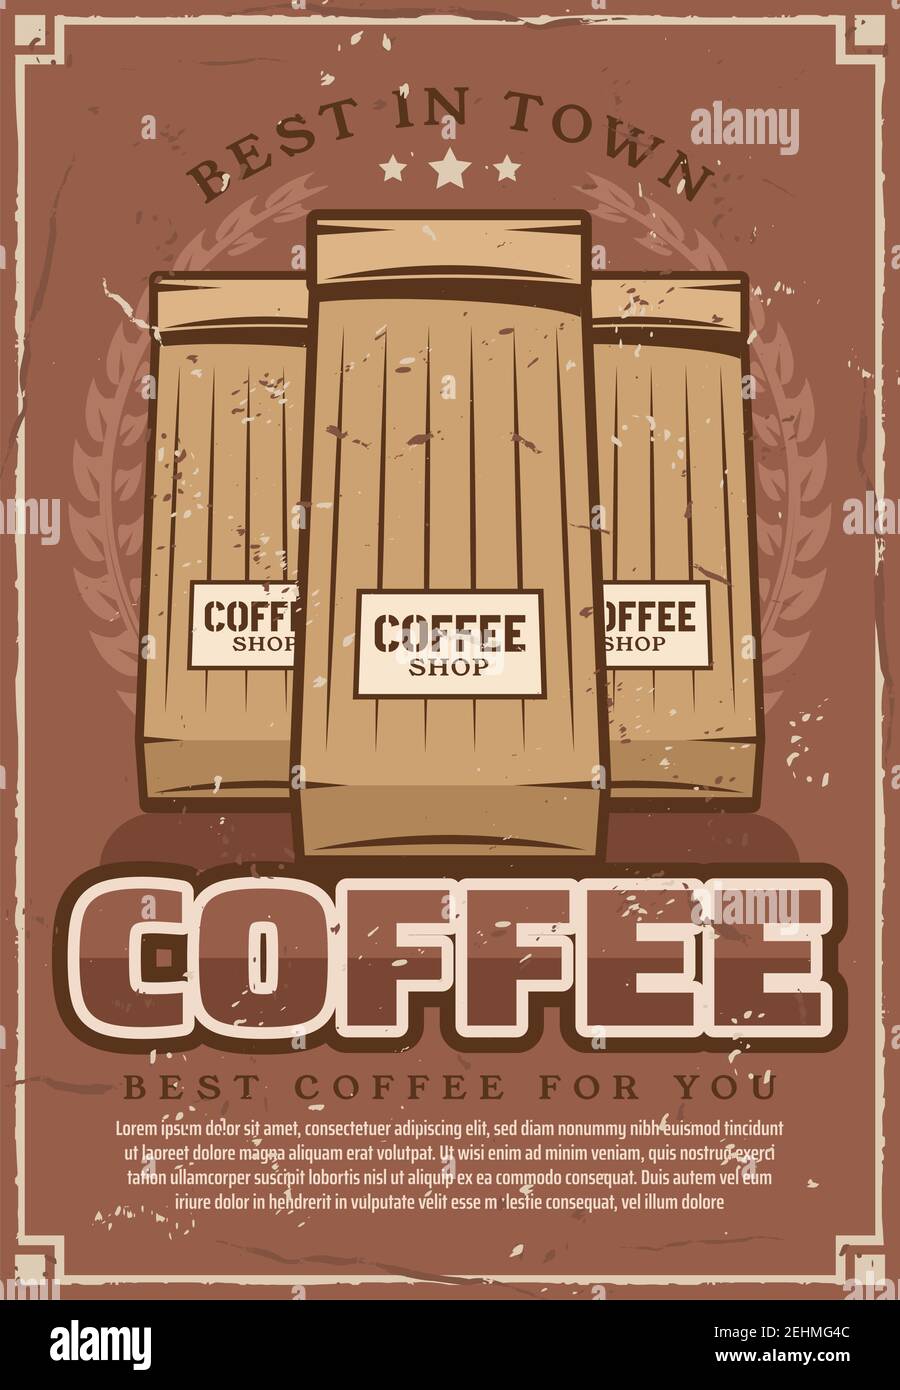 Coffeeshop retro poster of best coffee in paper packs. Vector vintage design arabica, Kenyan or Guatemalan coffee products for espresso, americano or Stock Vector